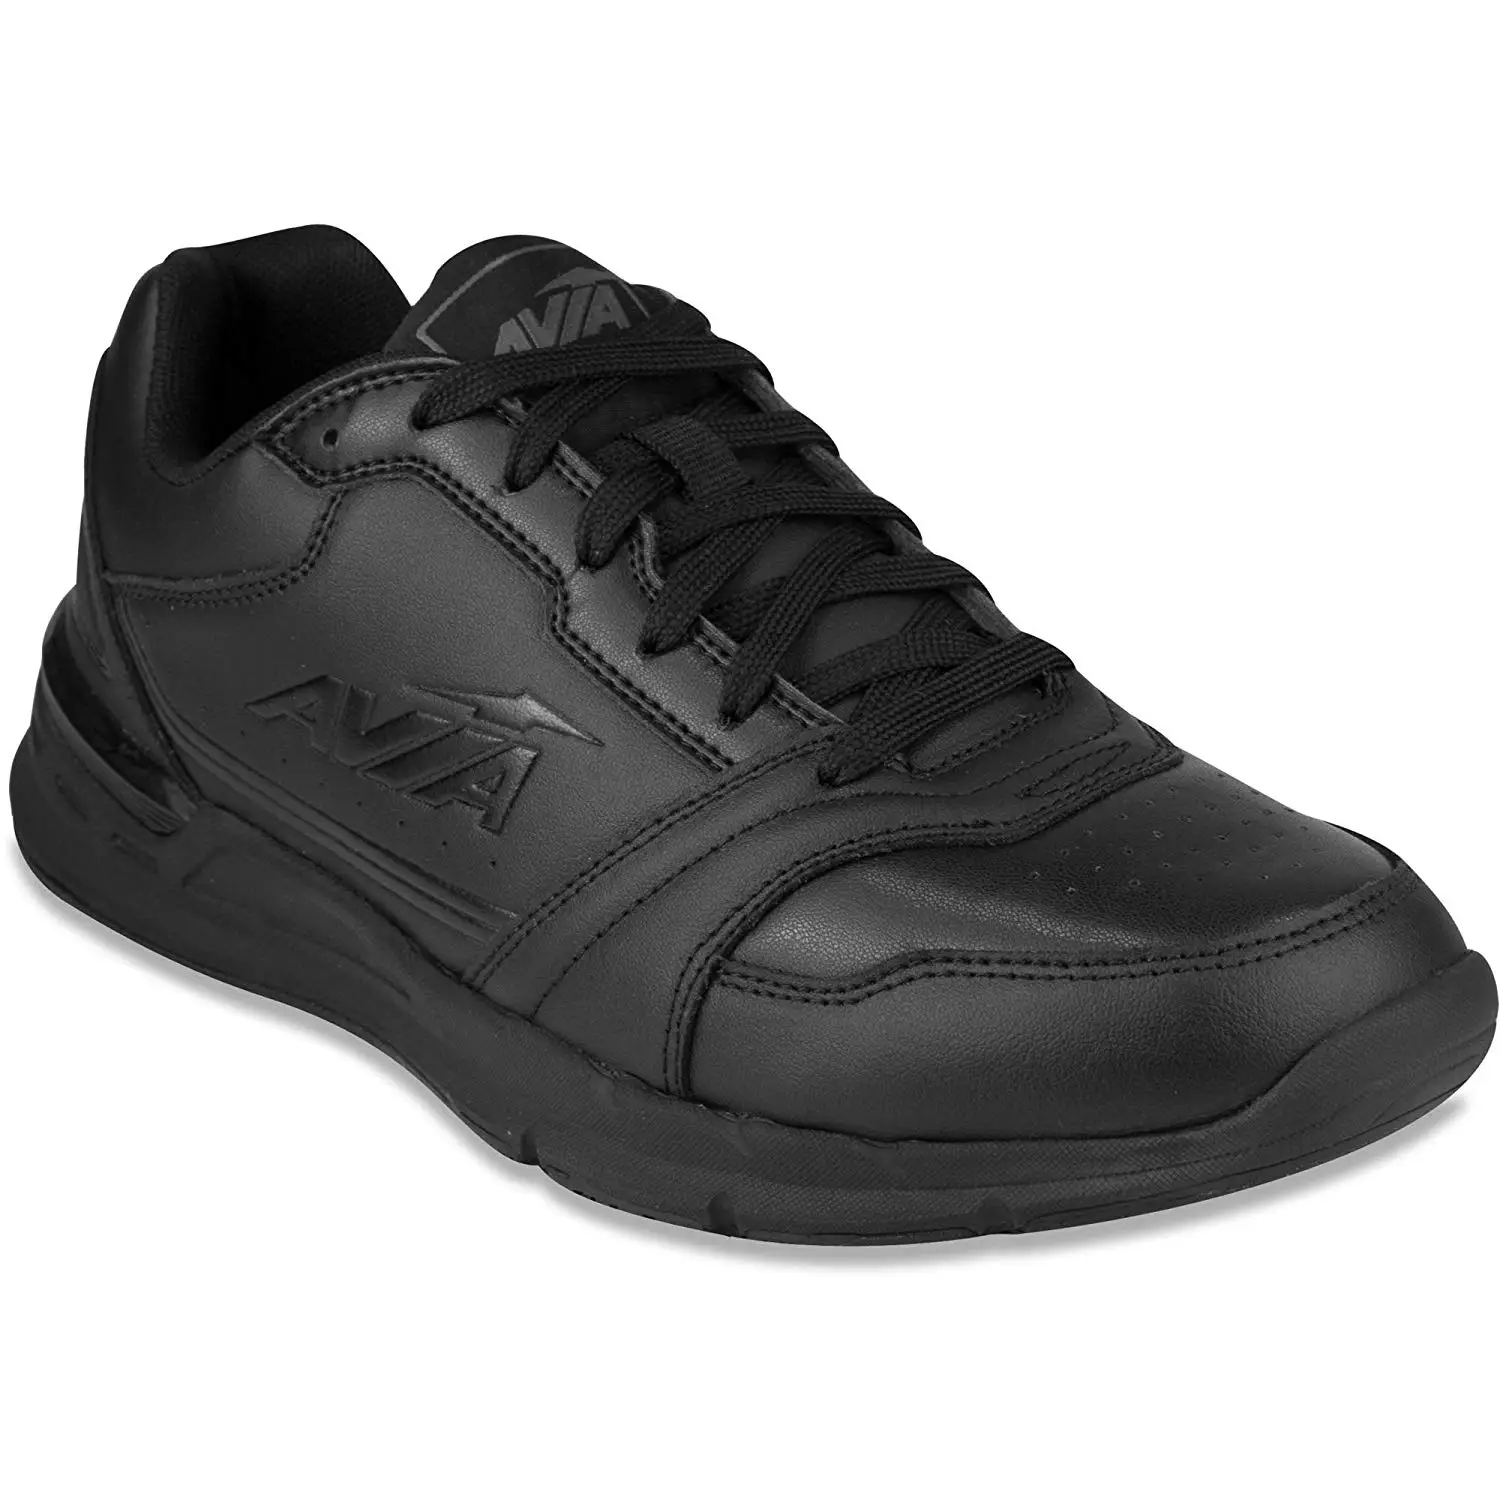 Cheap Avia Slip Resistant Shoes, find 